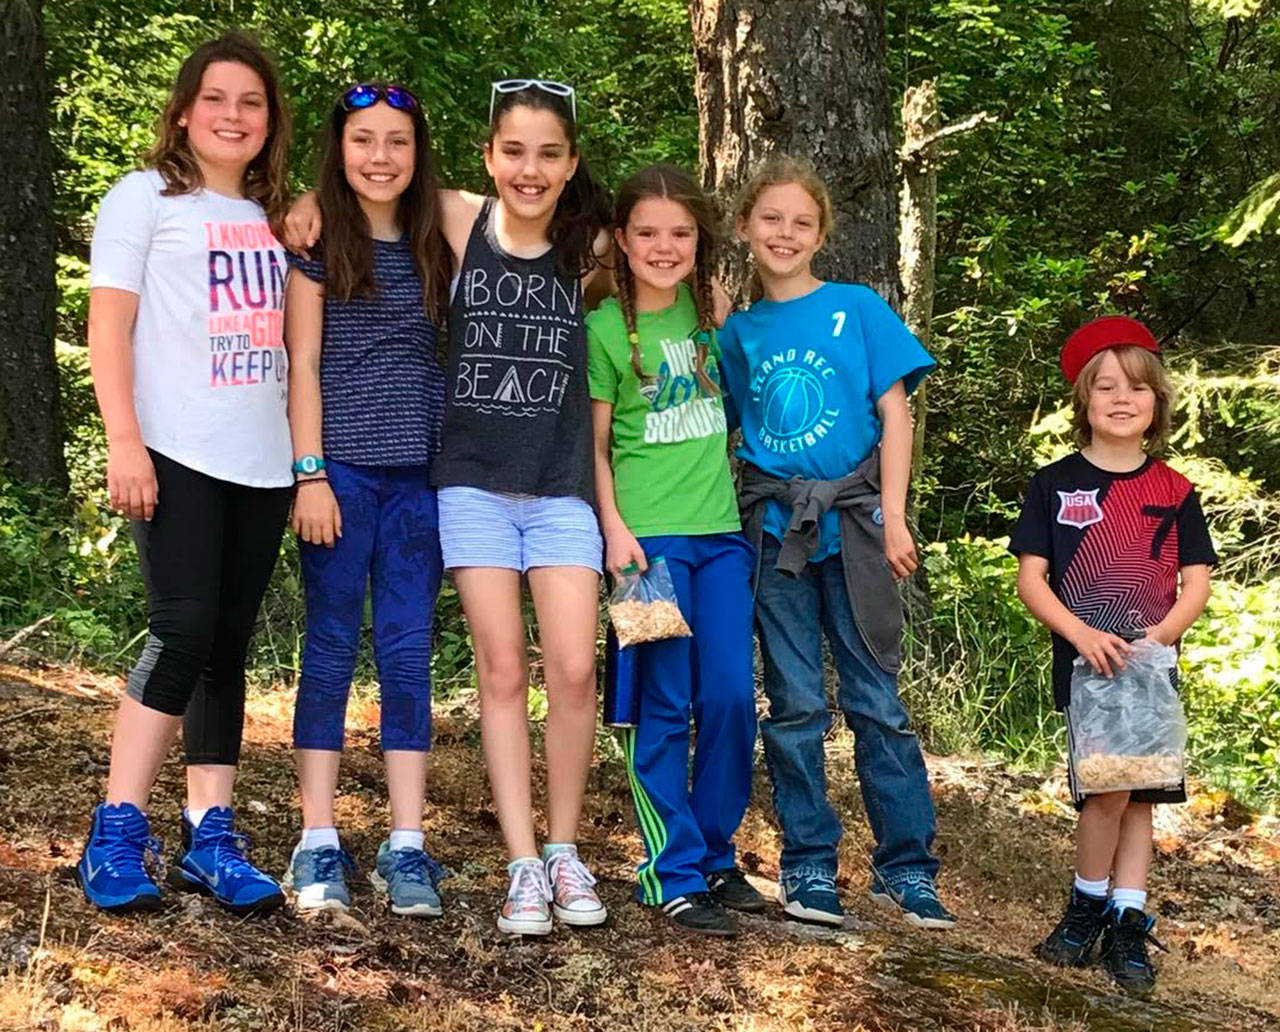 Contributed photo/Theresa Simendinger                                The group leaders, from right to left, were Giana Moalli, Grace Eltinge, Maggie Zehner, Ava Martin, Katie Ryan, and Milo Martin.